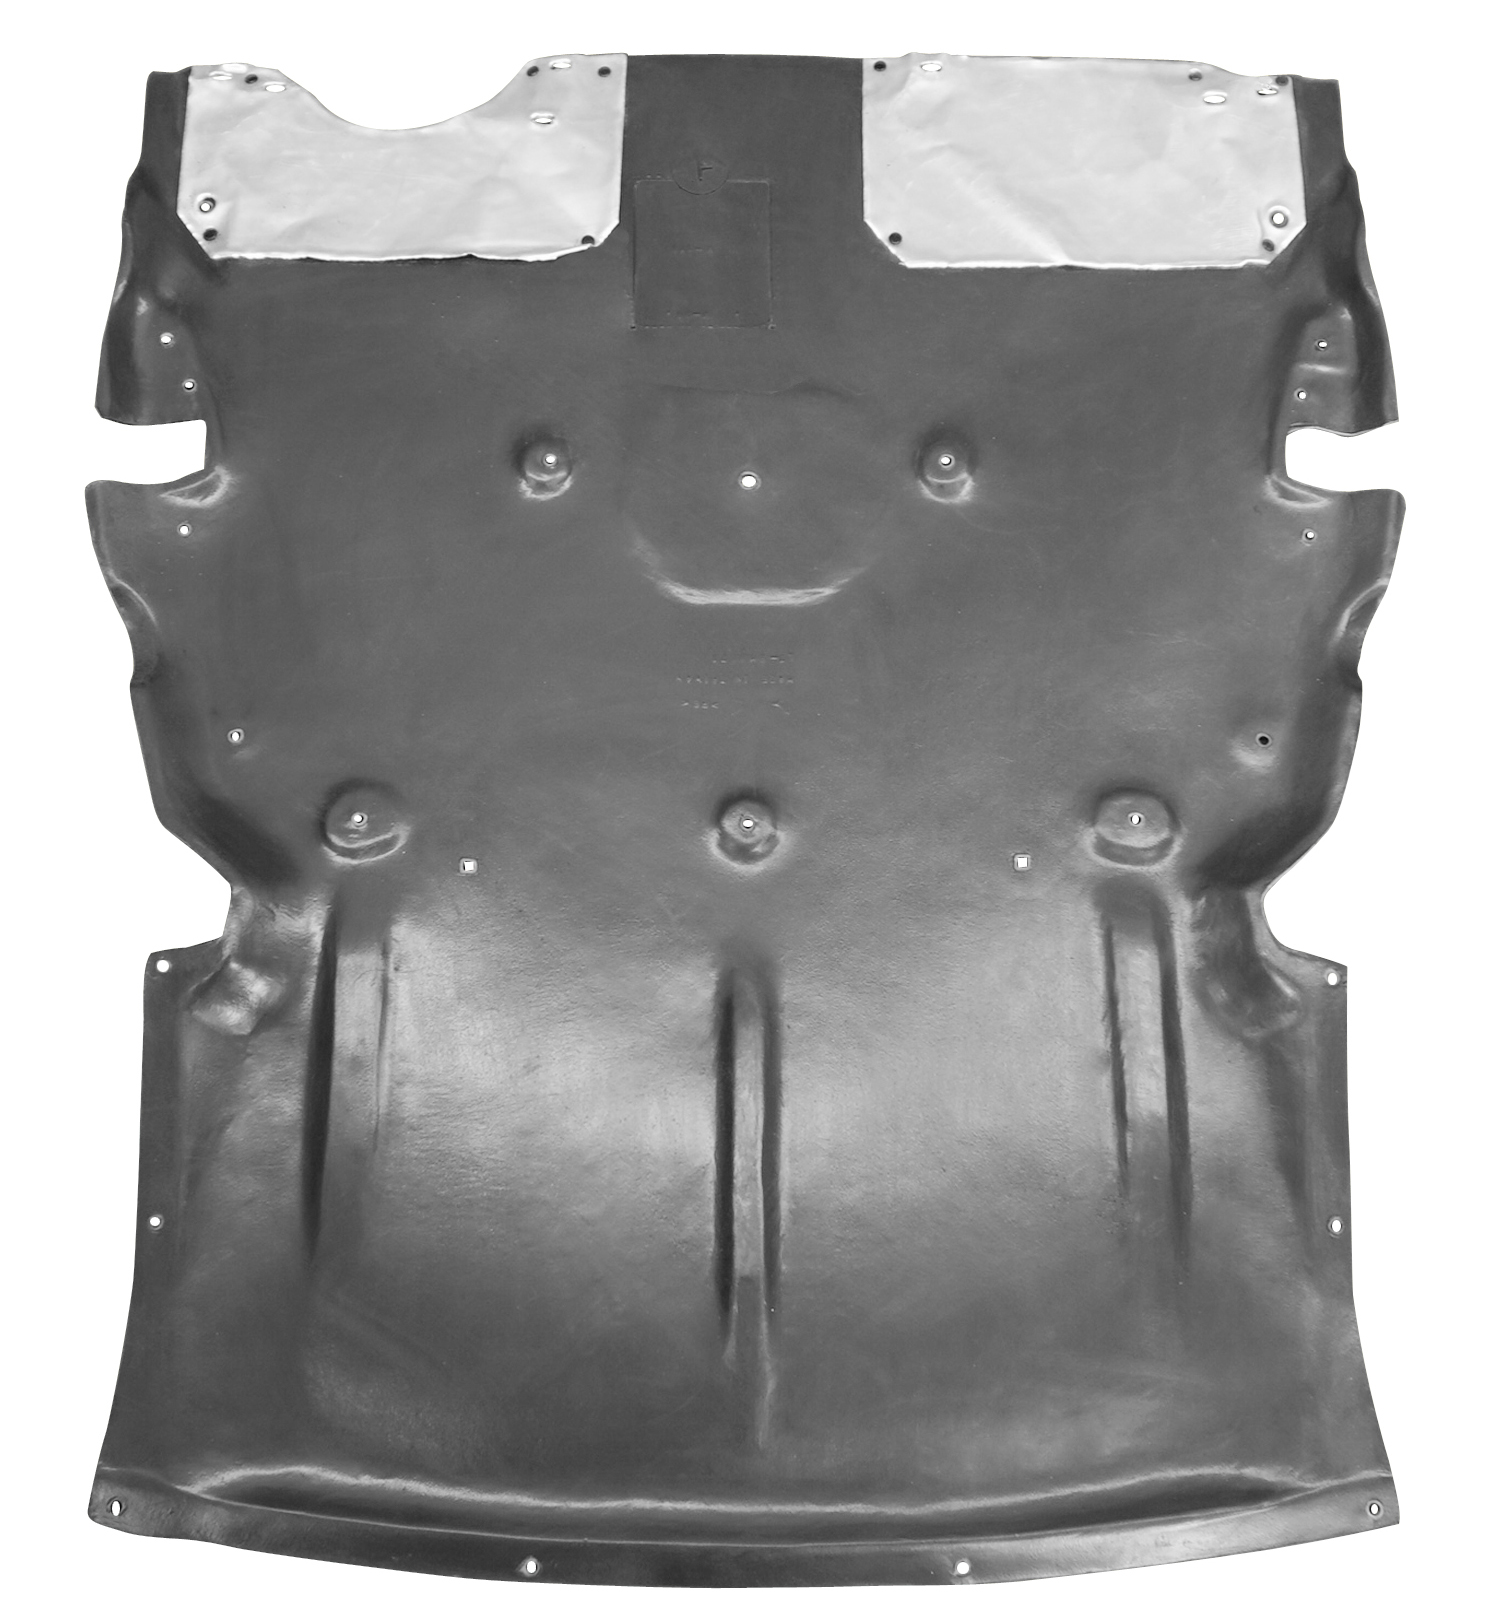 Aftermarket UNDER ENGINE COVERS for BMW - 230I, 230i,17-18,Lower engine cover